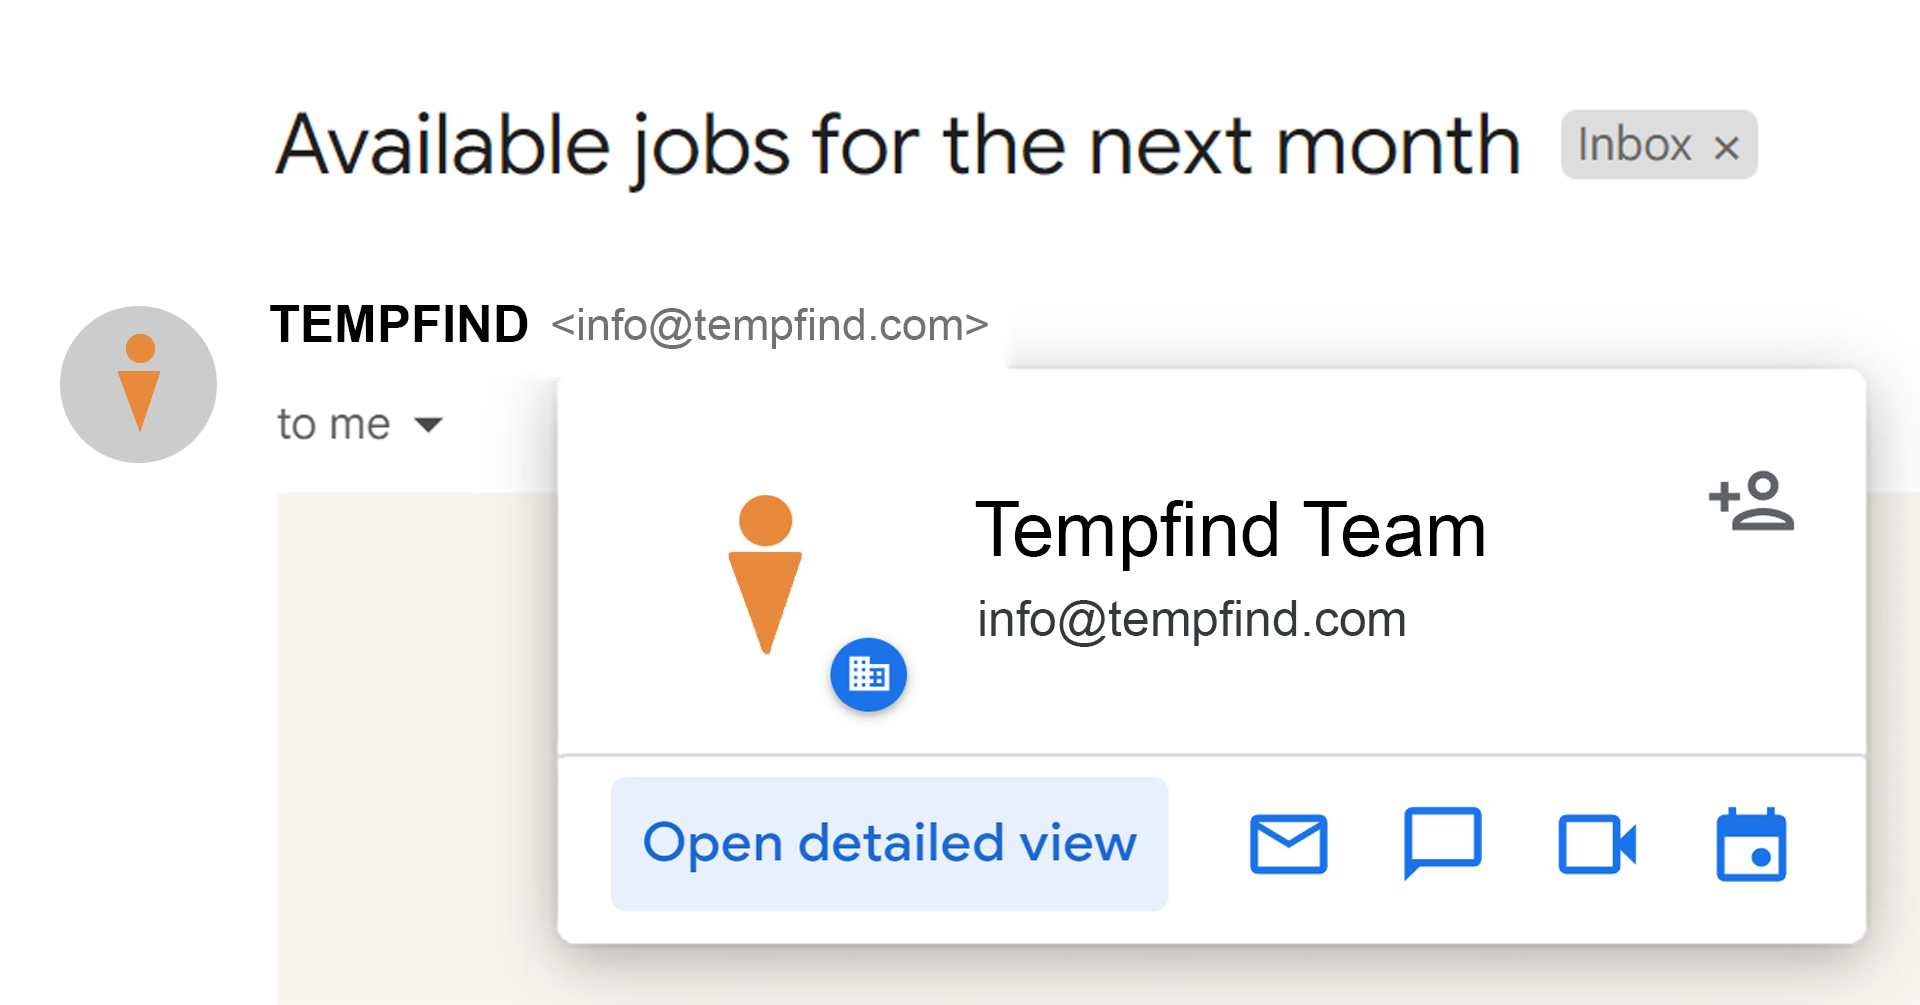 How to add Tempfind to your contacts